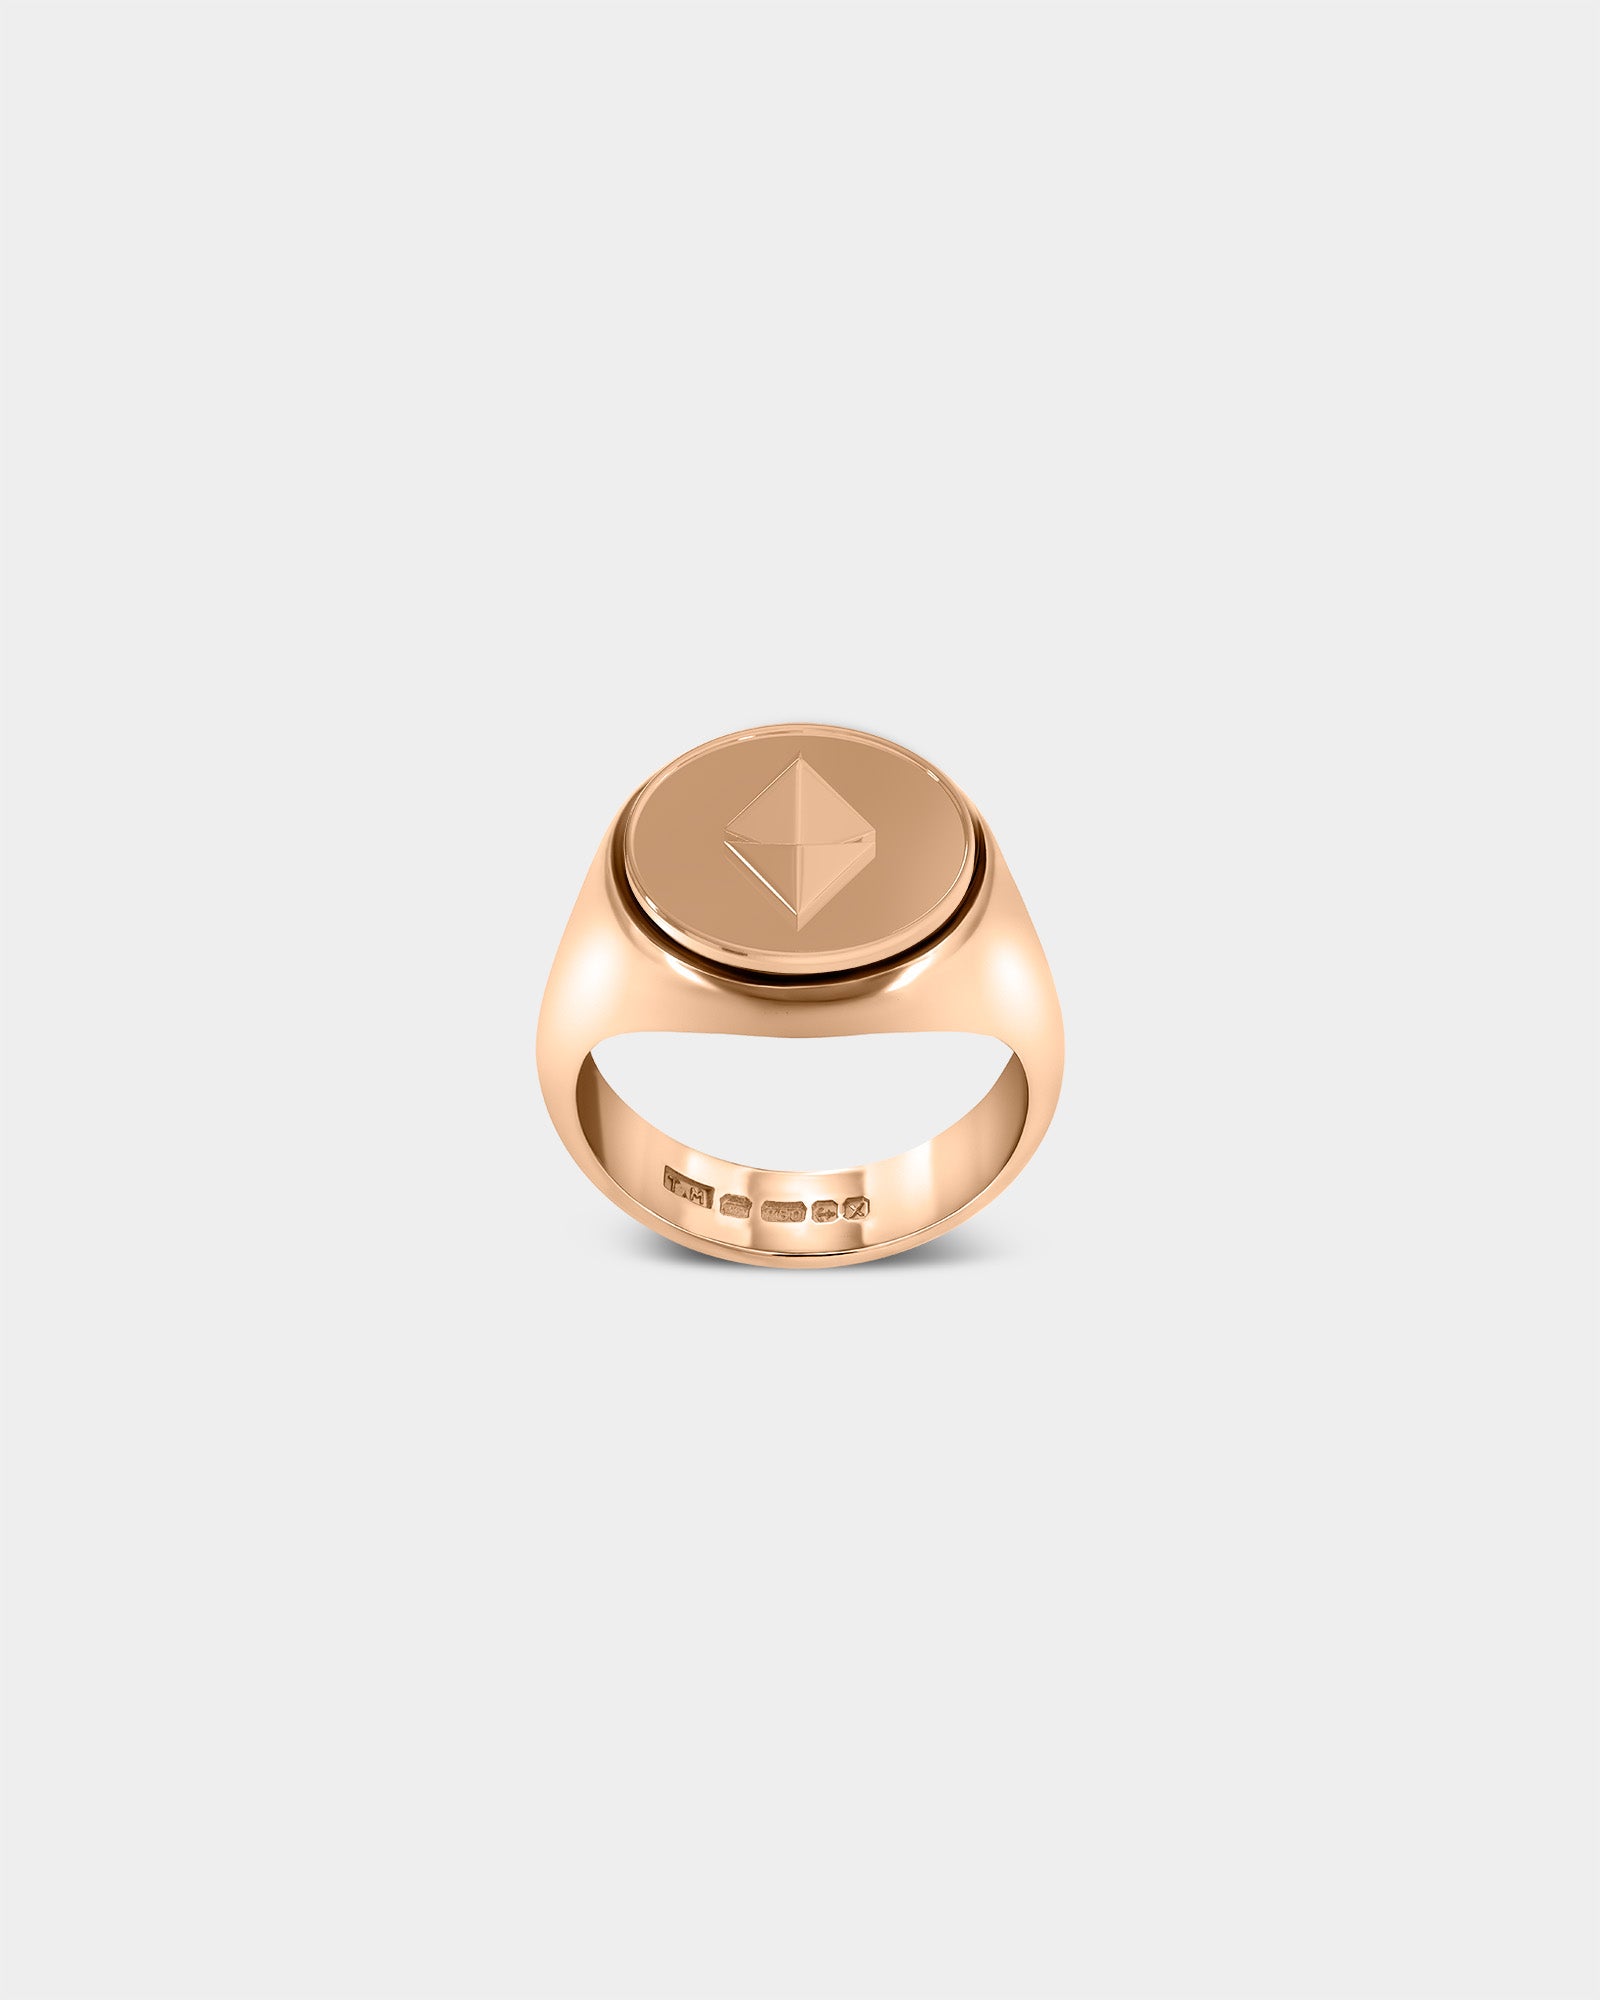 Large Ethereum Crypto Ring in 9k Rose Gold by Wilson Grant